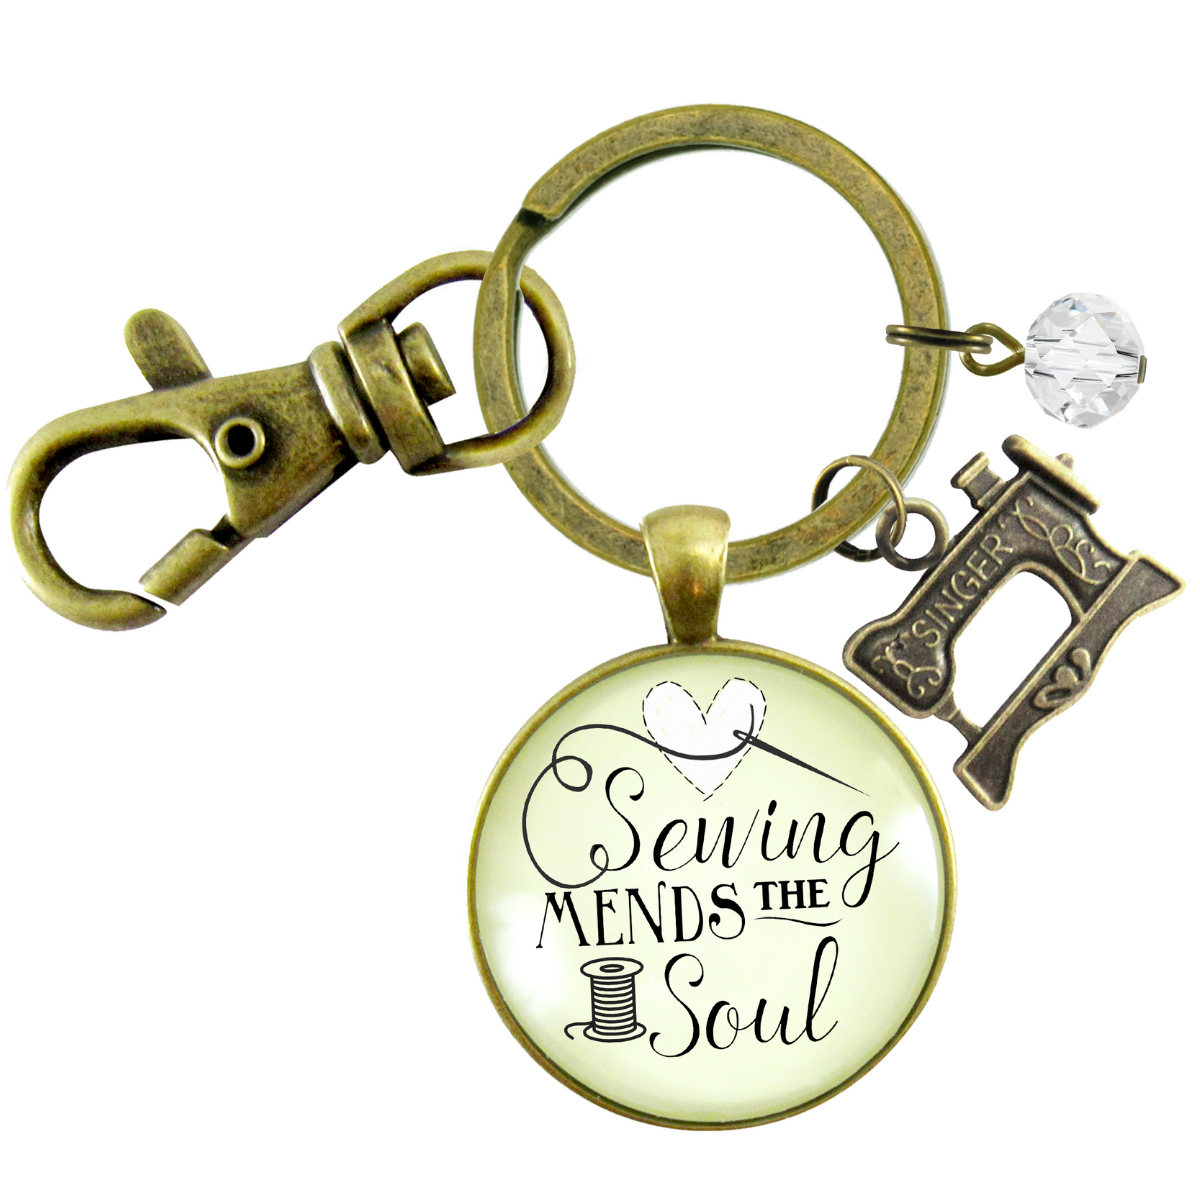 Sewing Keychain Mends the Soul Seamstress Key Ring Bronze Jewelry Machine Charm - Gutsy Goodness Handmade Jewelry;Sewing Keychain Mends The Soul Seamstress Key Ring Bronze Jewelry Machine Charm - Gutsy Goodness Handmade Jewelry Gifts